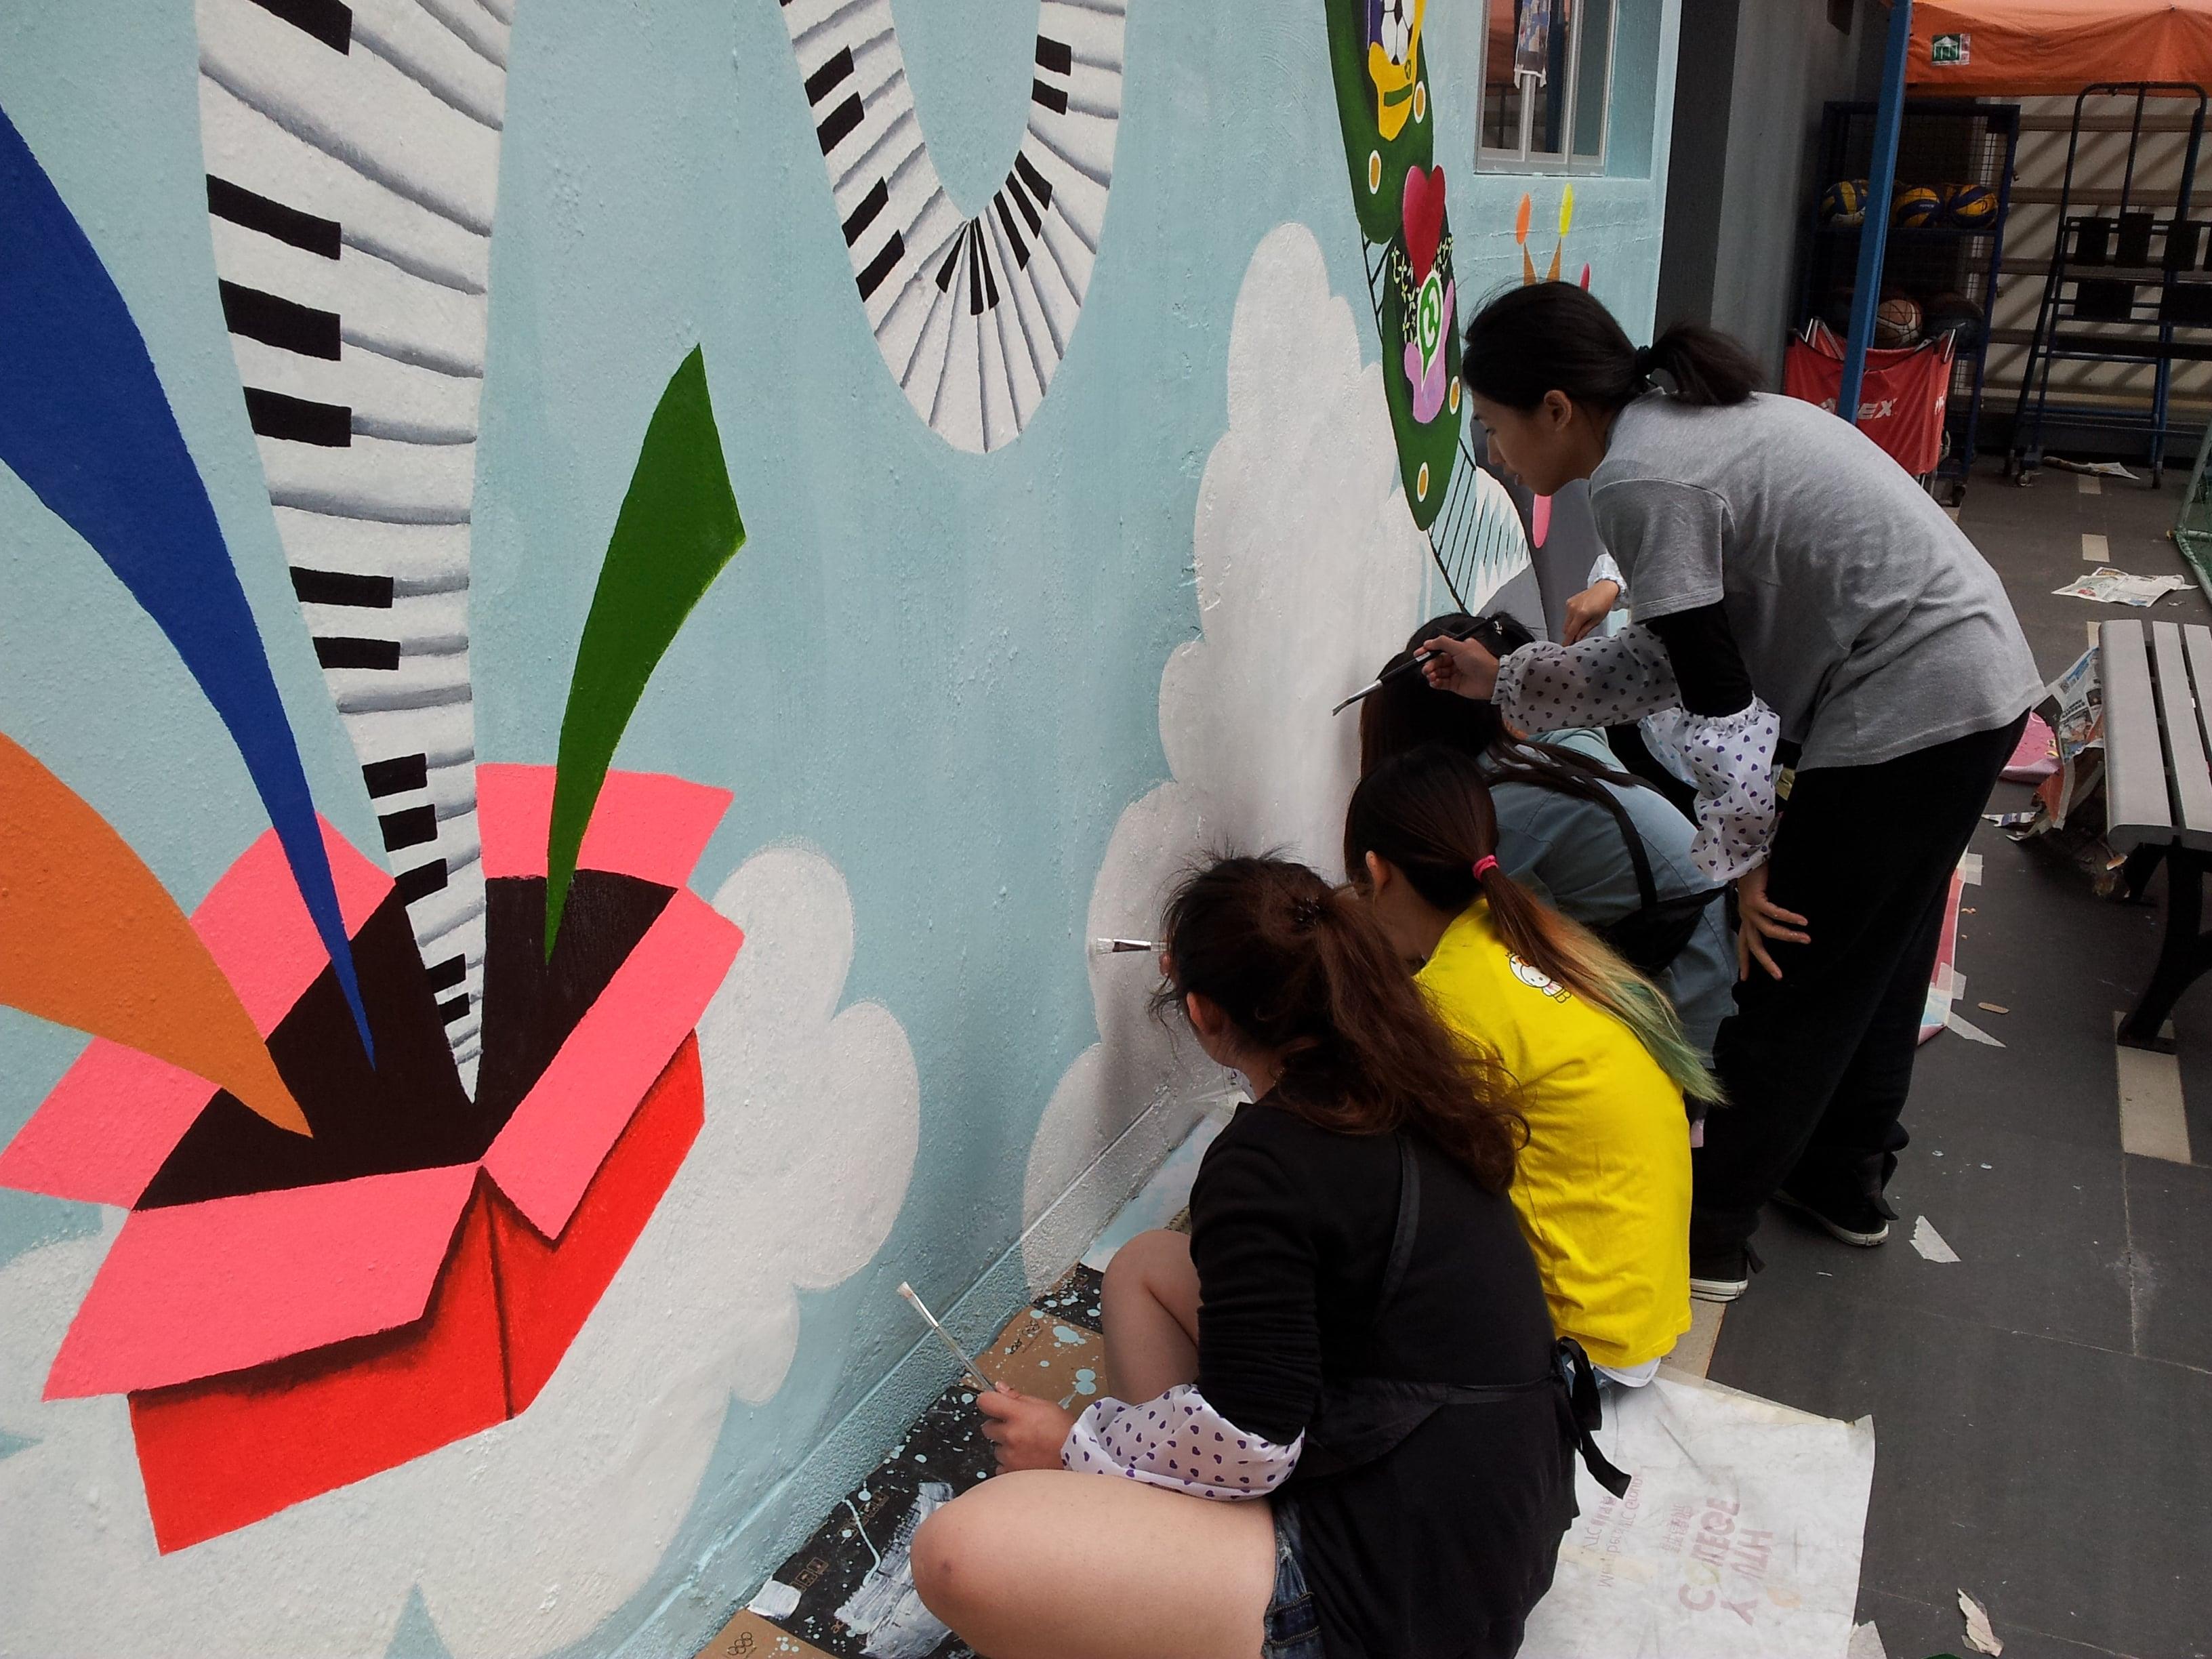 Students decorated school facilities by wall painting 